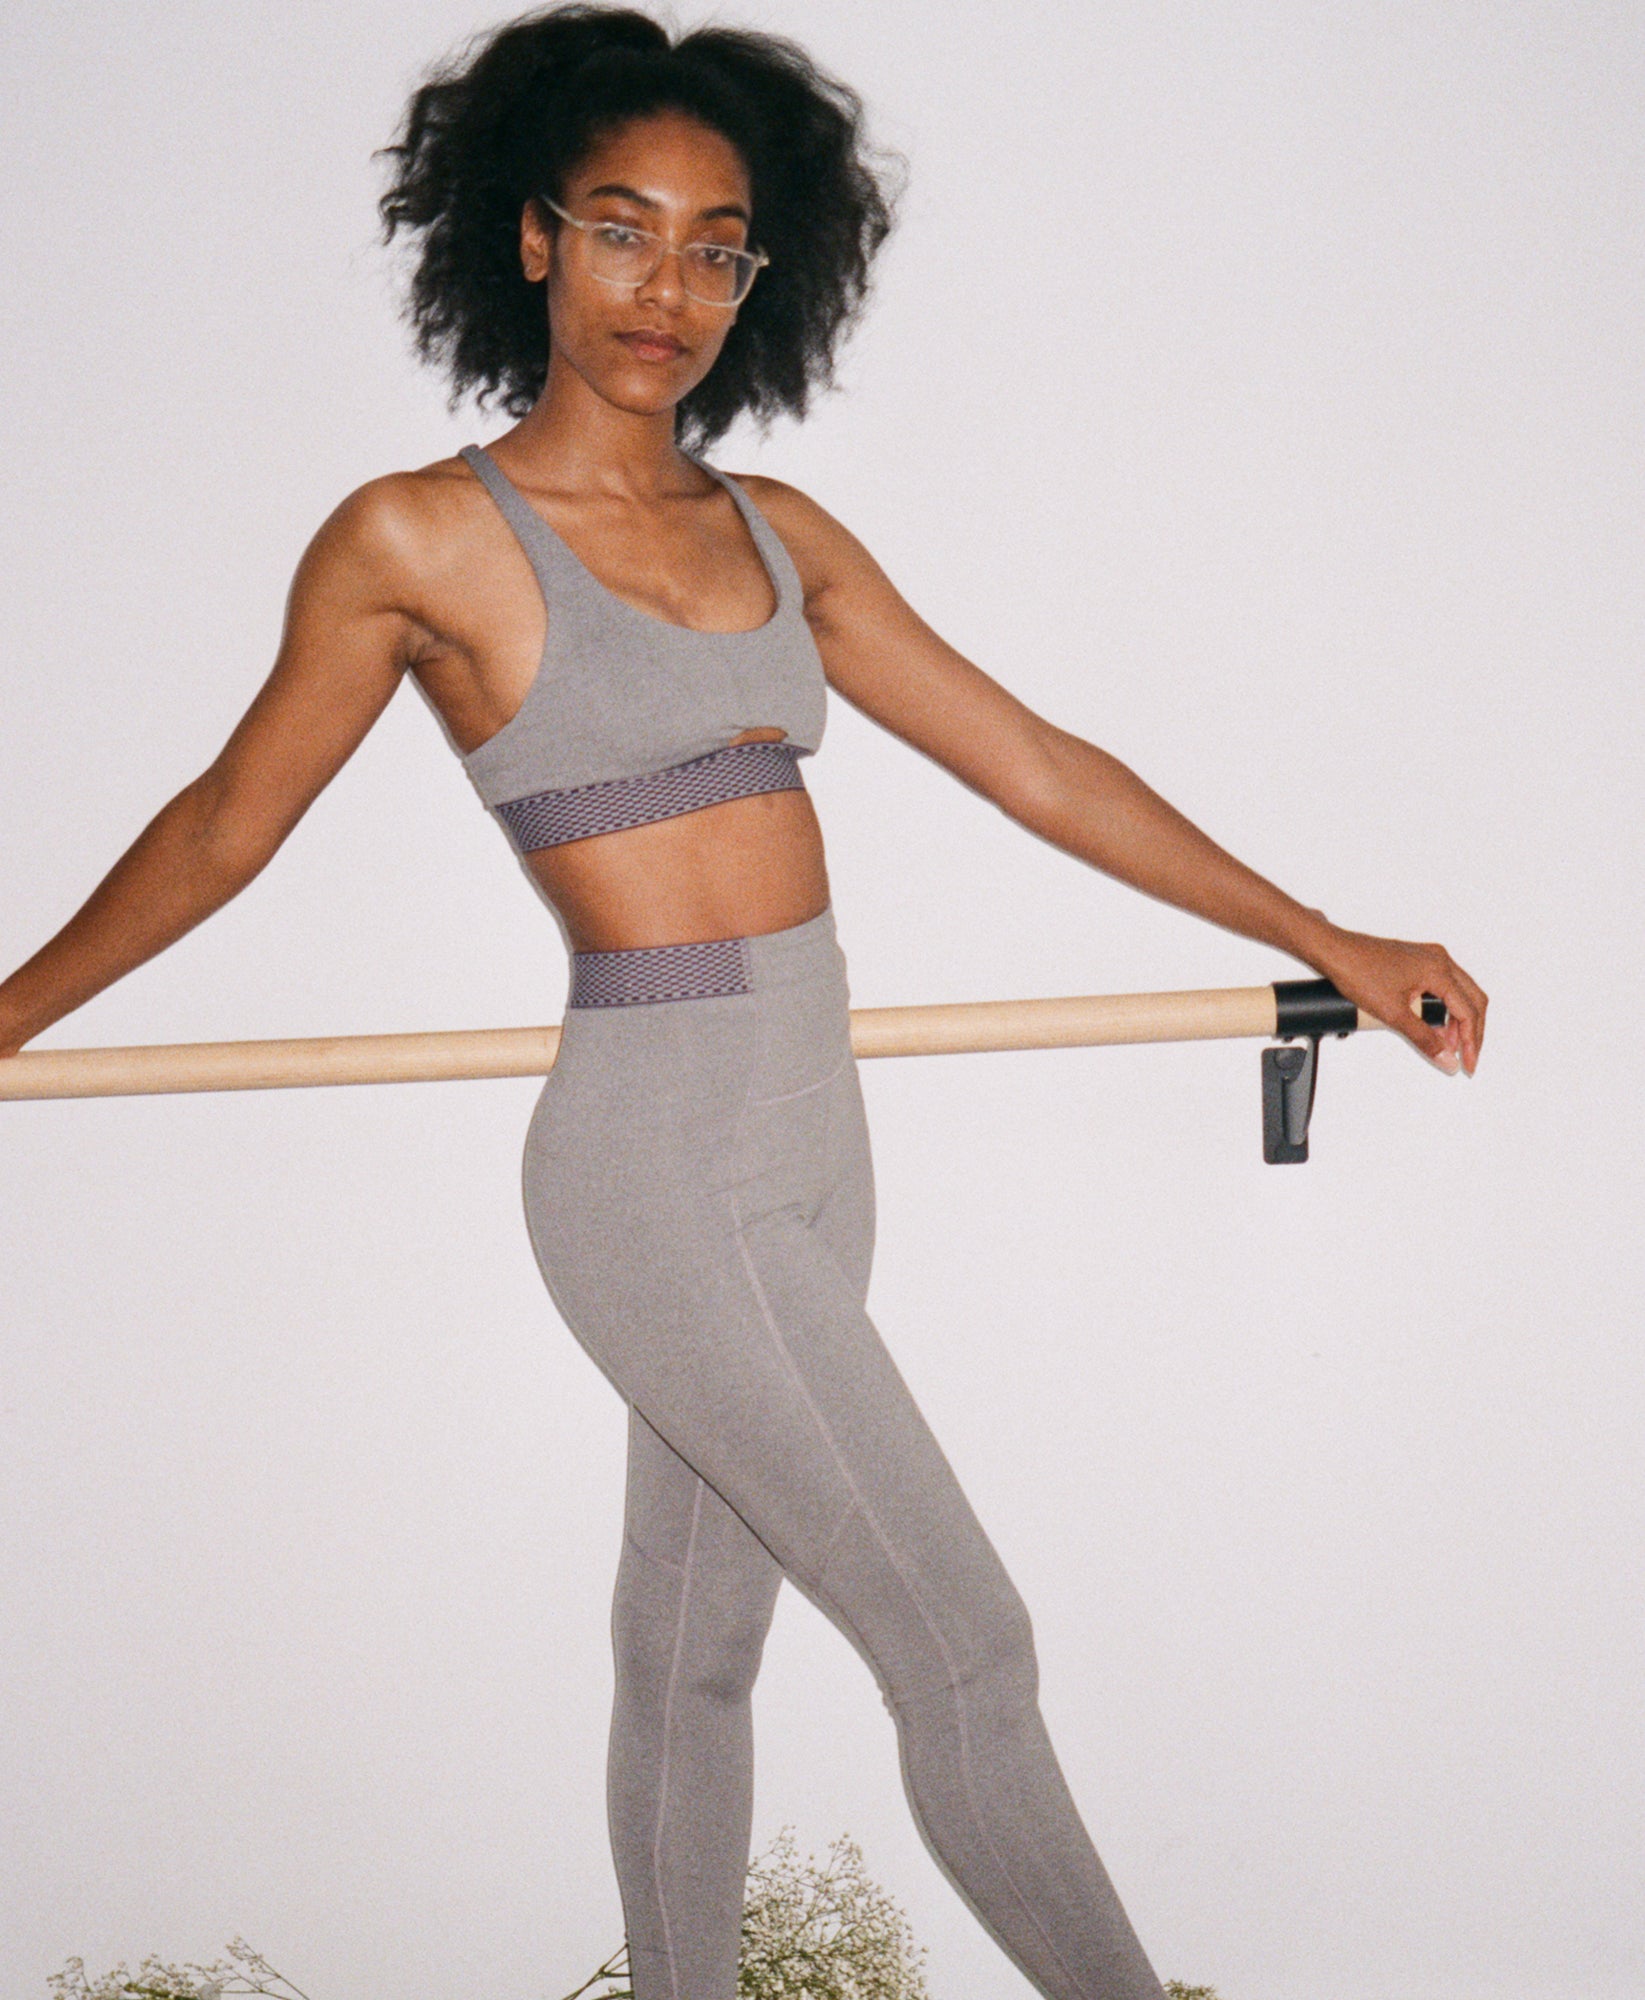 Free Throw Full Length Legging in Sport Grey Made With Recycled